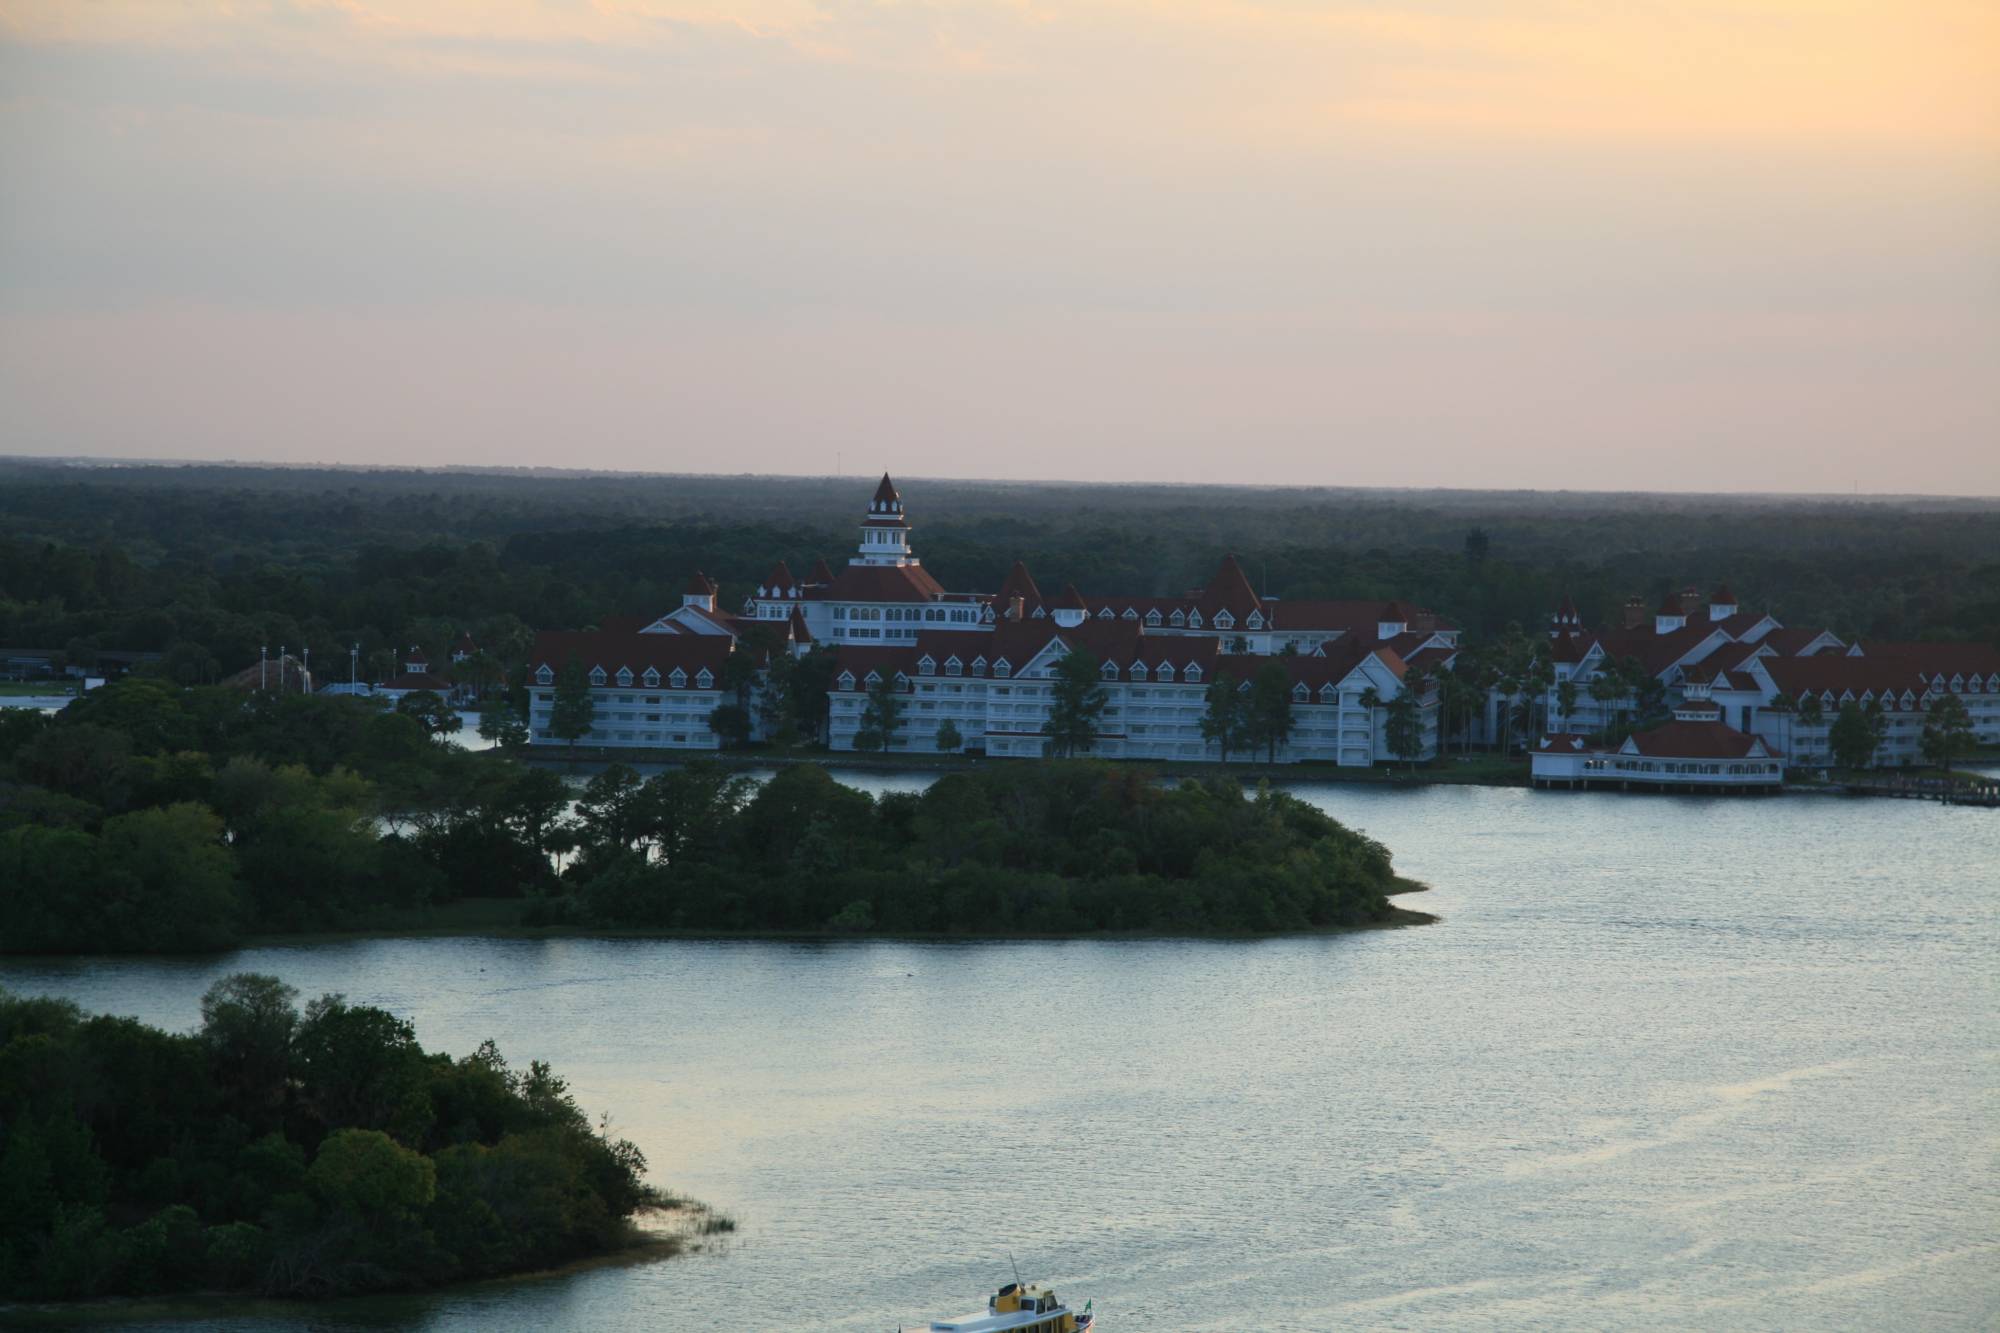 Grand Floridian from the Contemporary